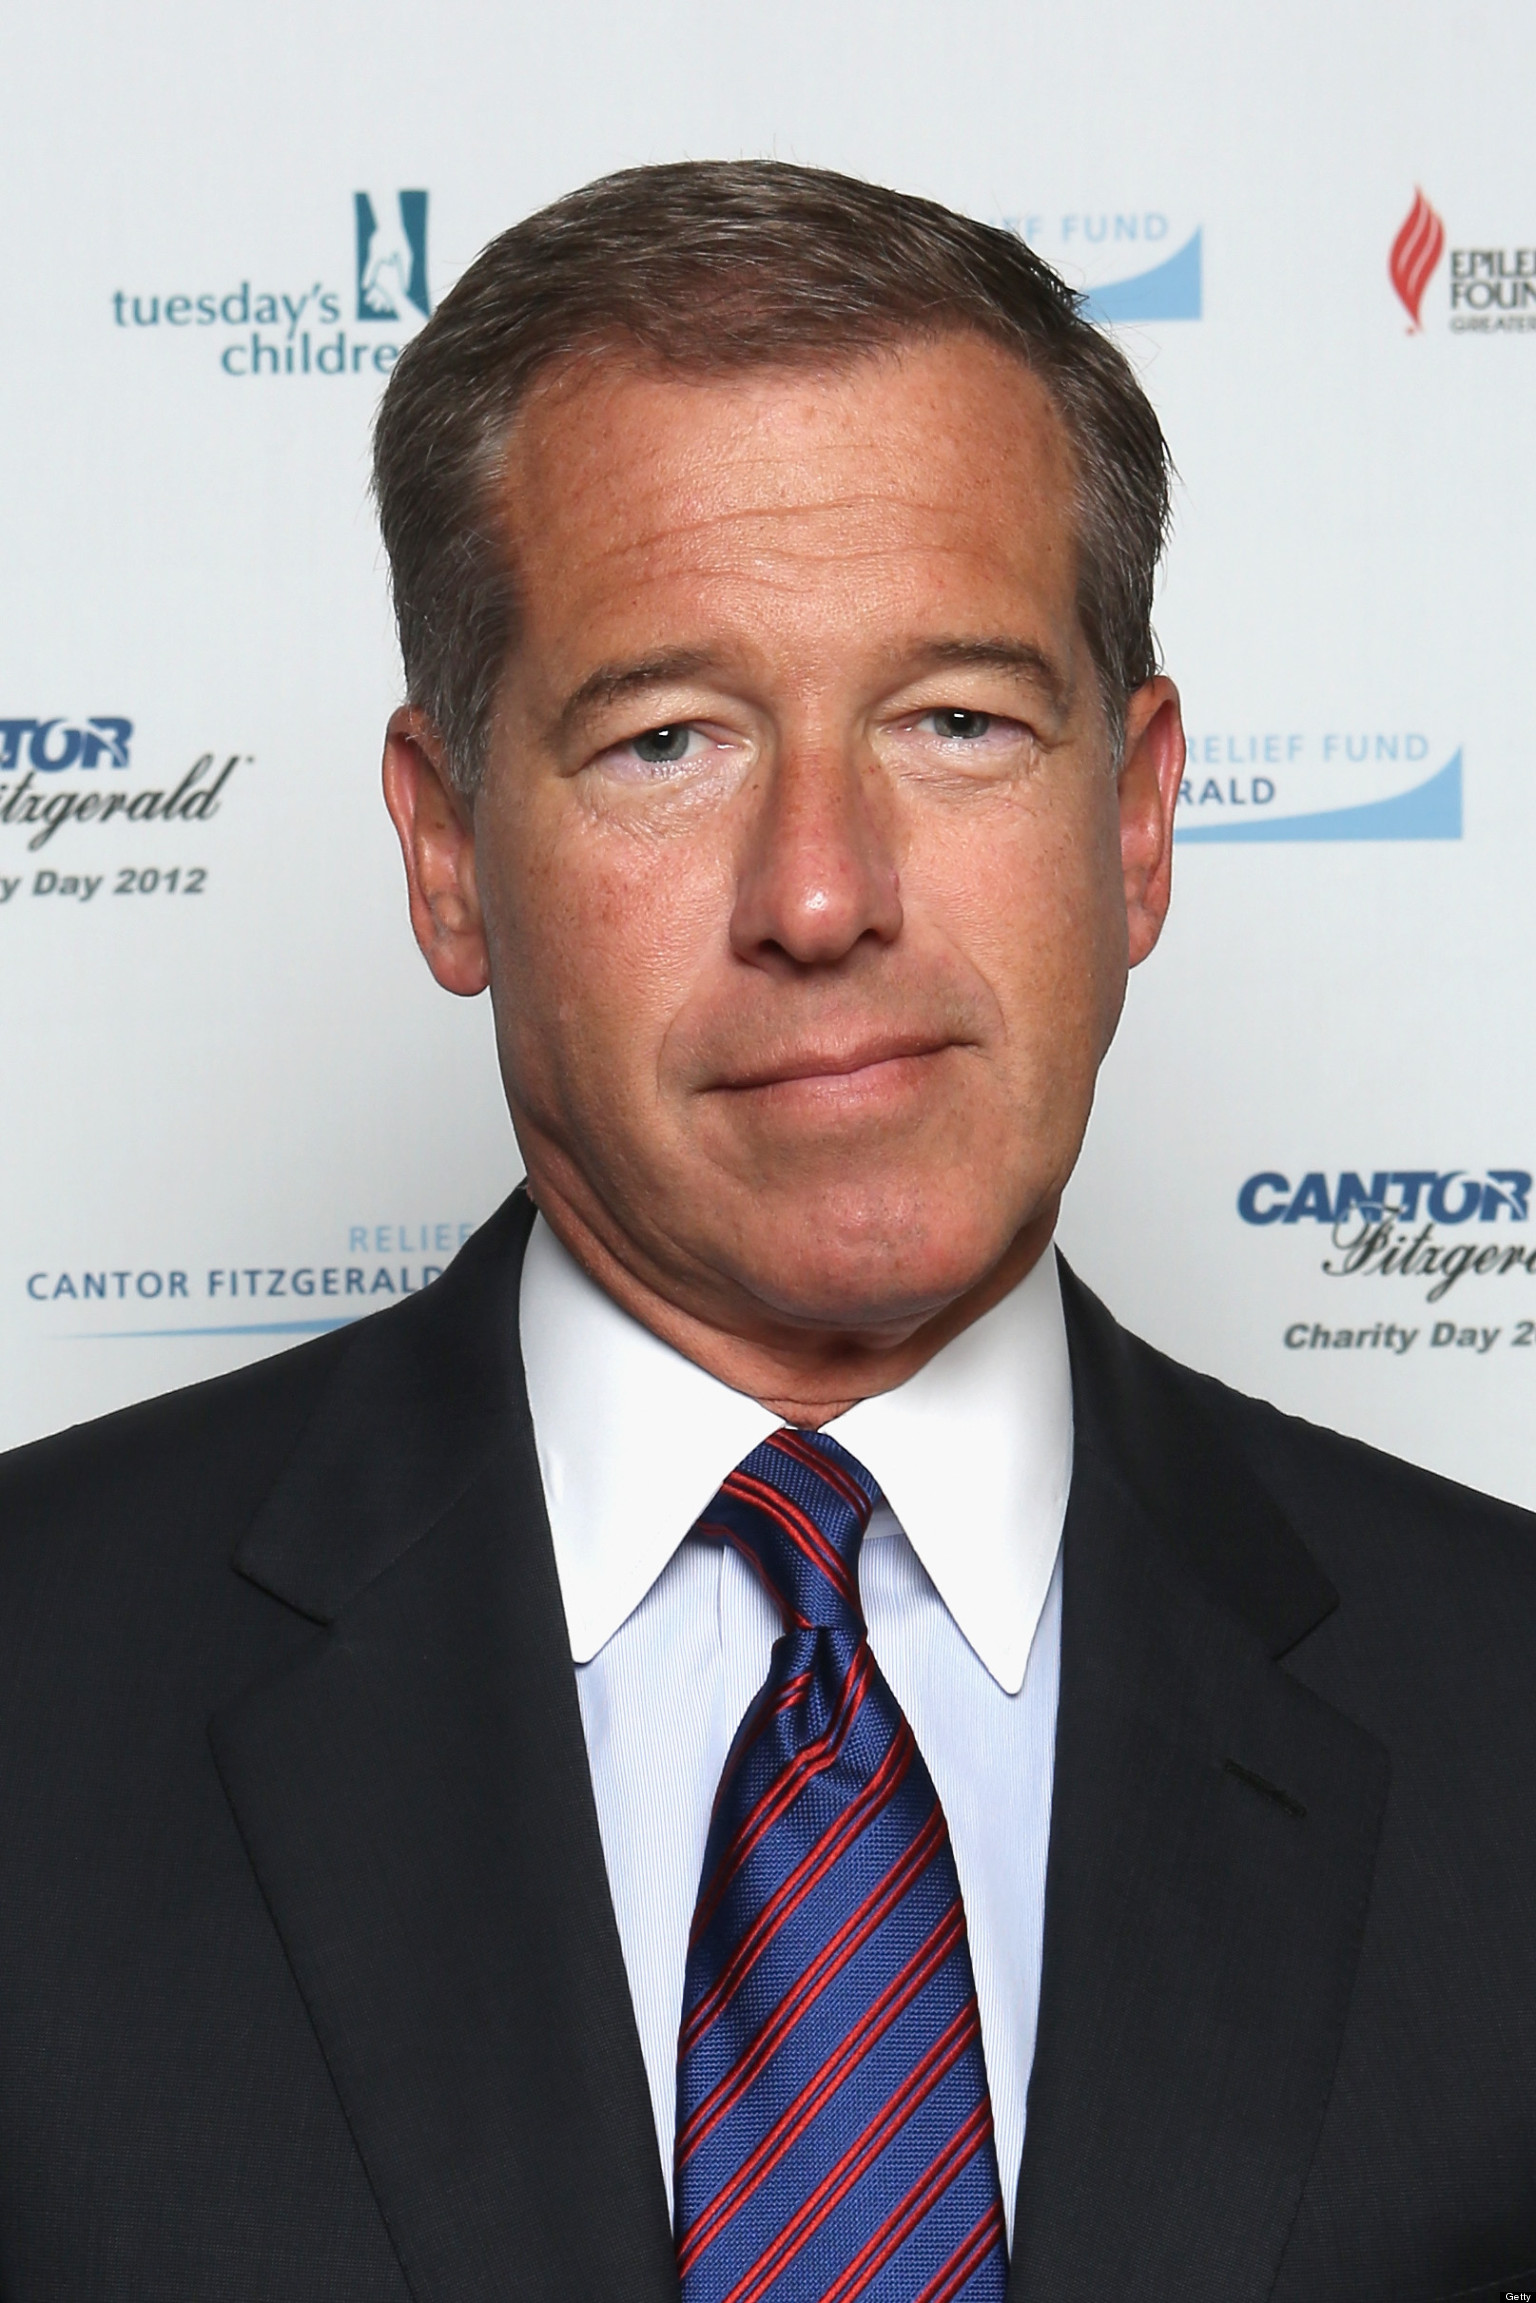 Brian Williams Getting Knee Replacement Surgery, Taking Medical Leave (VIDEO) - o-BRIAN-WILLIAMS-facebook